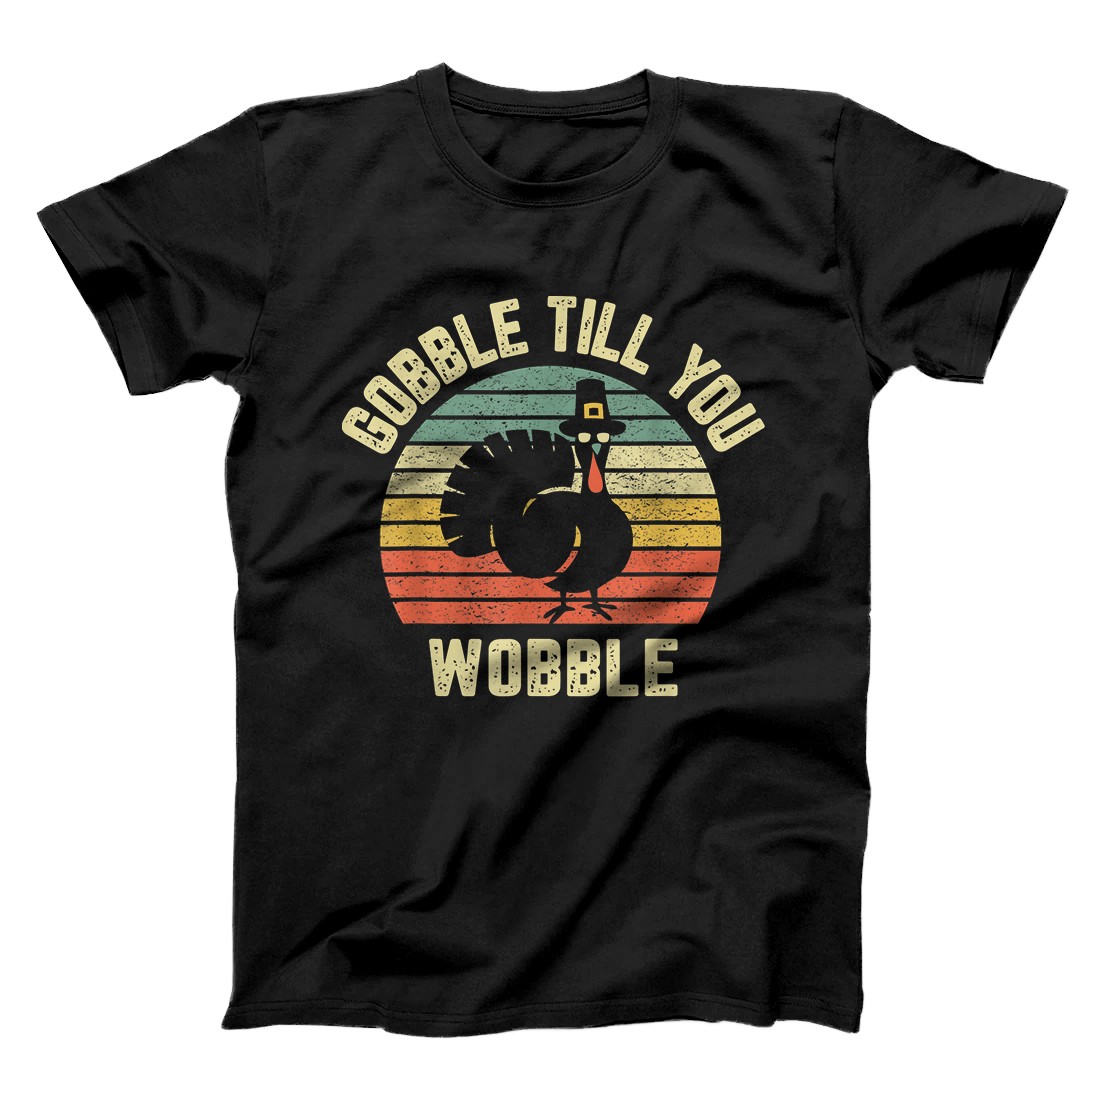 Personalized Funny Thanksgiving Shirt Cool Turkey Gobble Till You Wobble T-Shirt